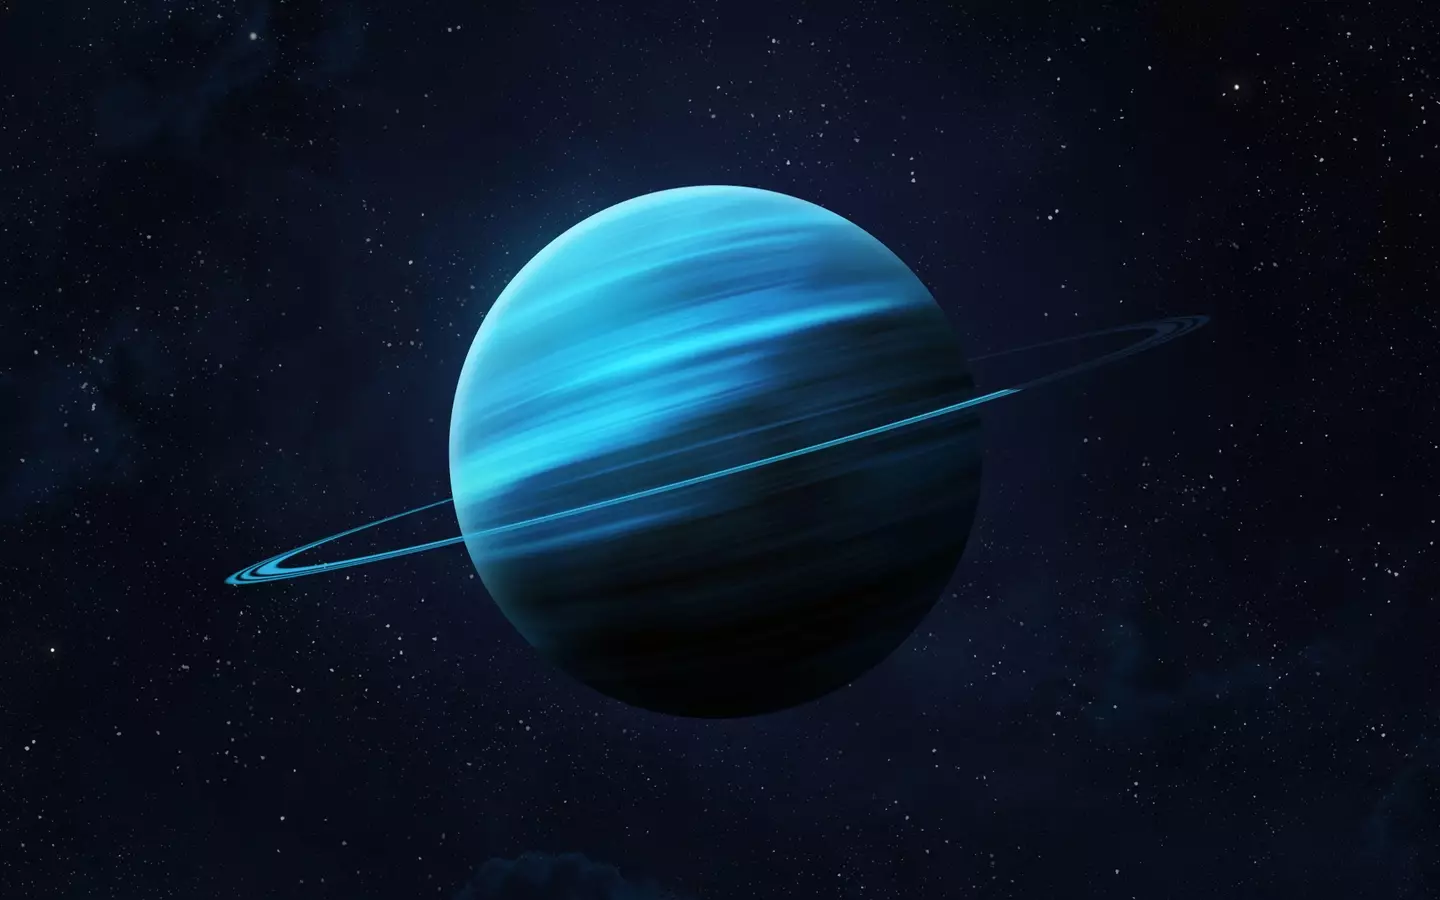 While Uranus is a subtle pale blue, Neptune, on the other hand, is a bright deep blue.